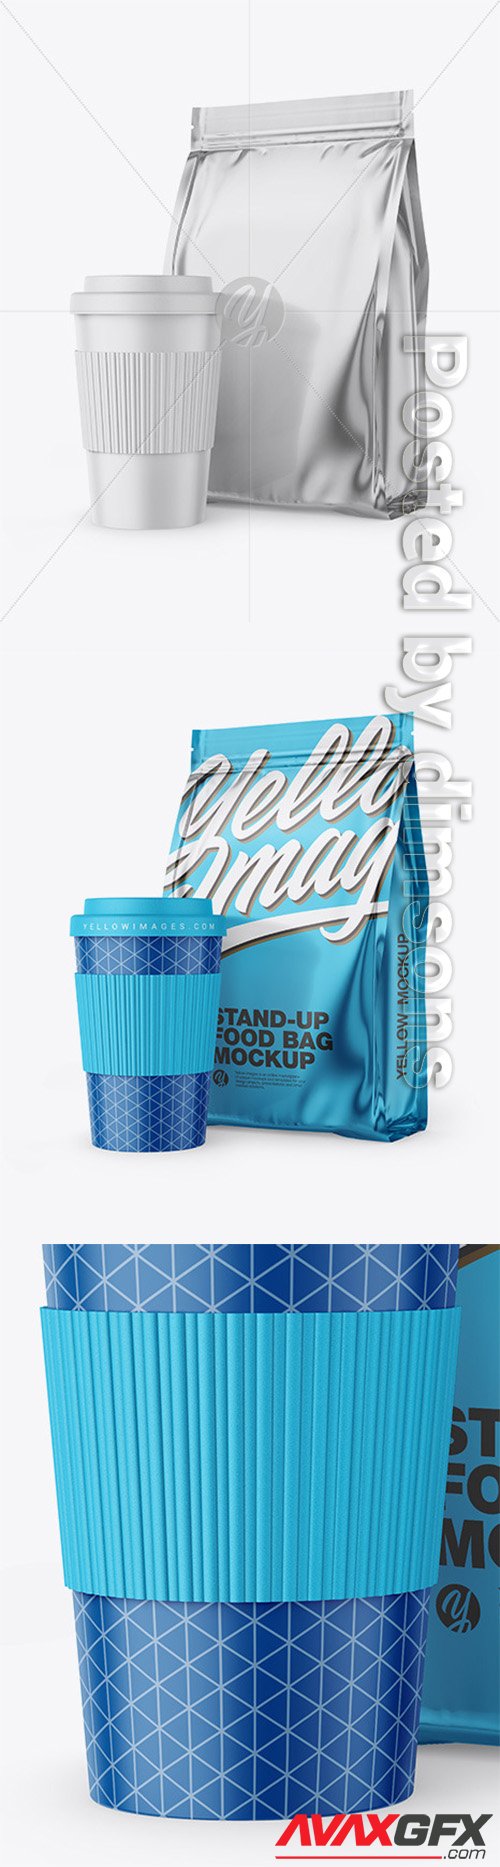 Download Metallic Stand Up Bag With Coffee Cup Mockup 65091 Avaxgfx All Downloads That You Need In One Place Graphic From Nitroflare Rapidgator PSD Mockup Templates